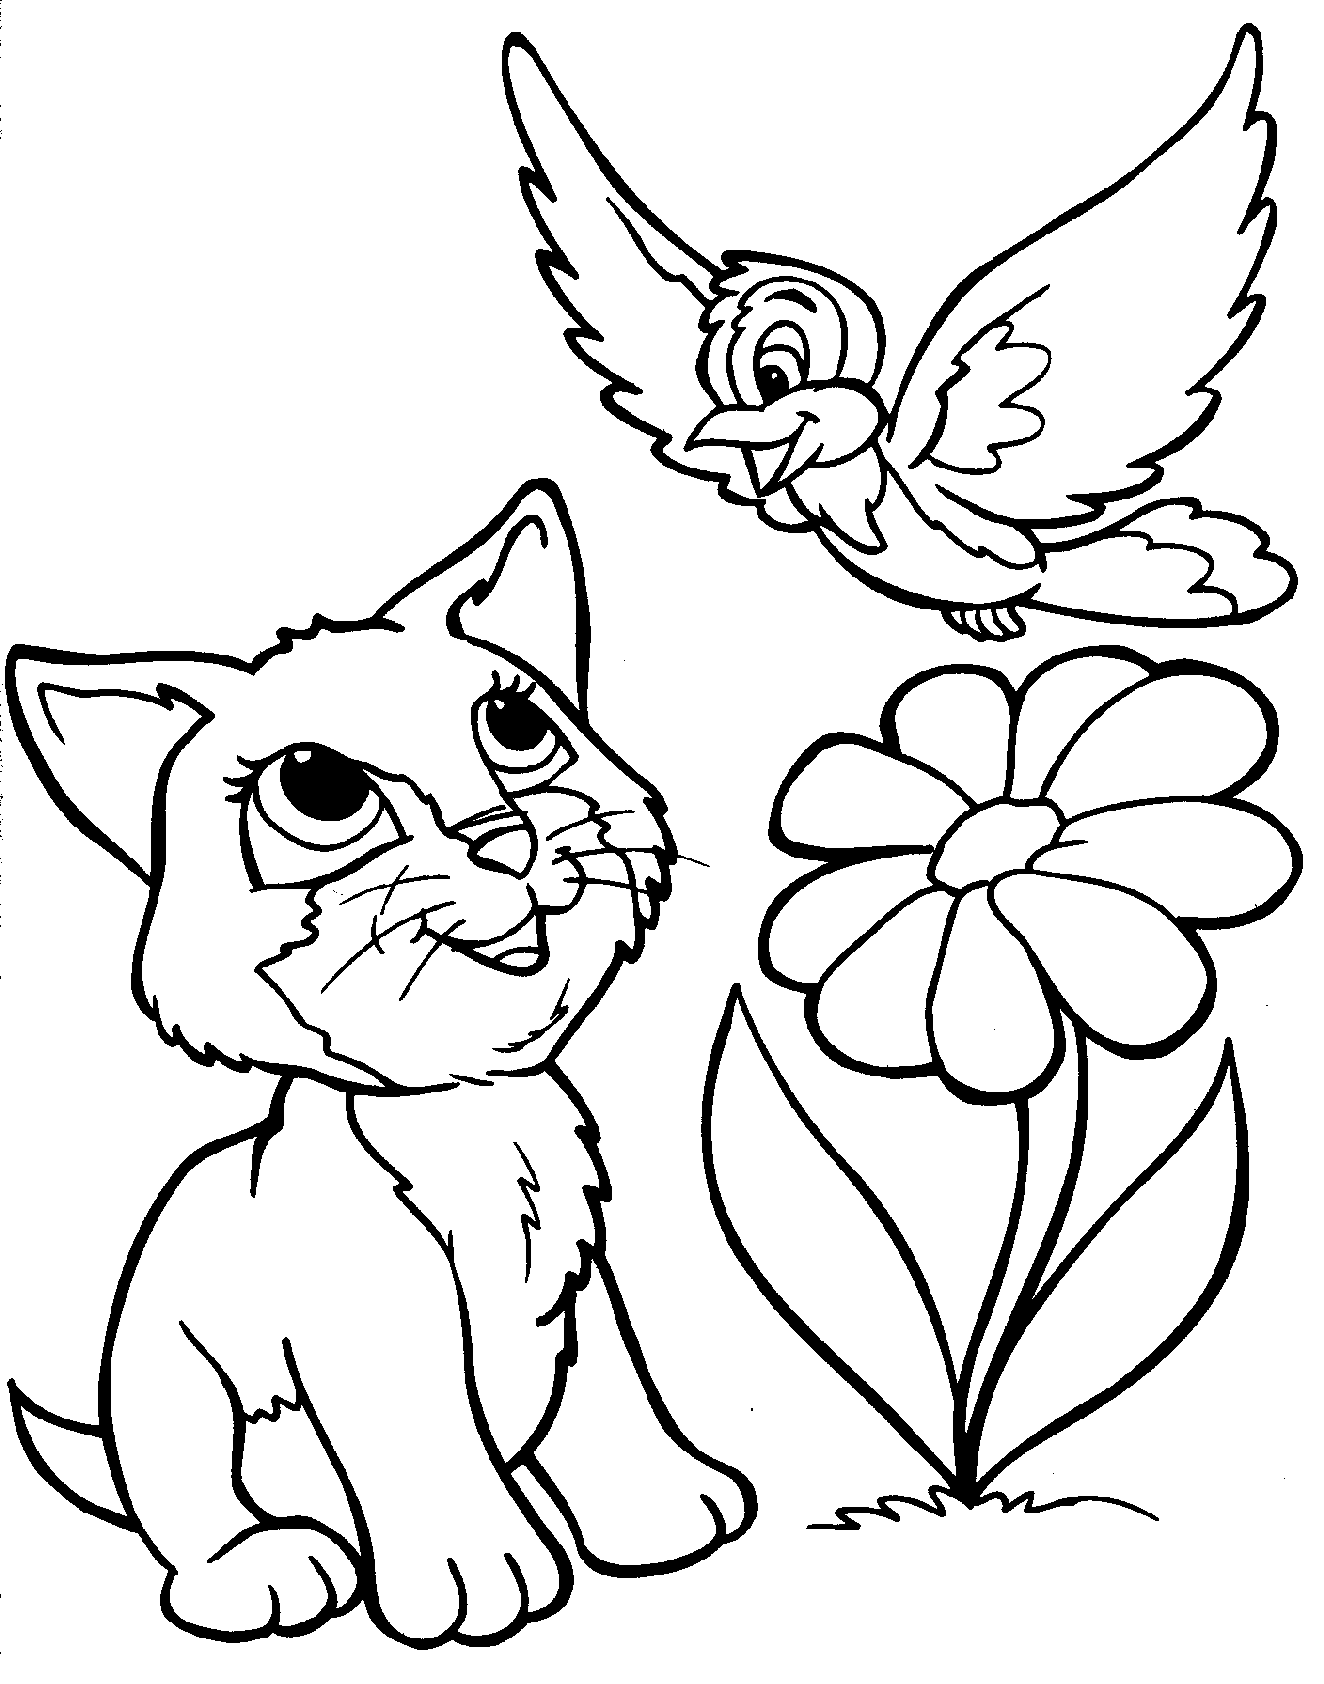 Cat Coloring Pages Â» Cenul – Free Coloring Pages For Kids